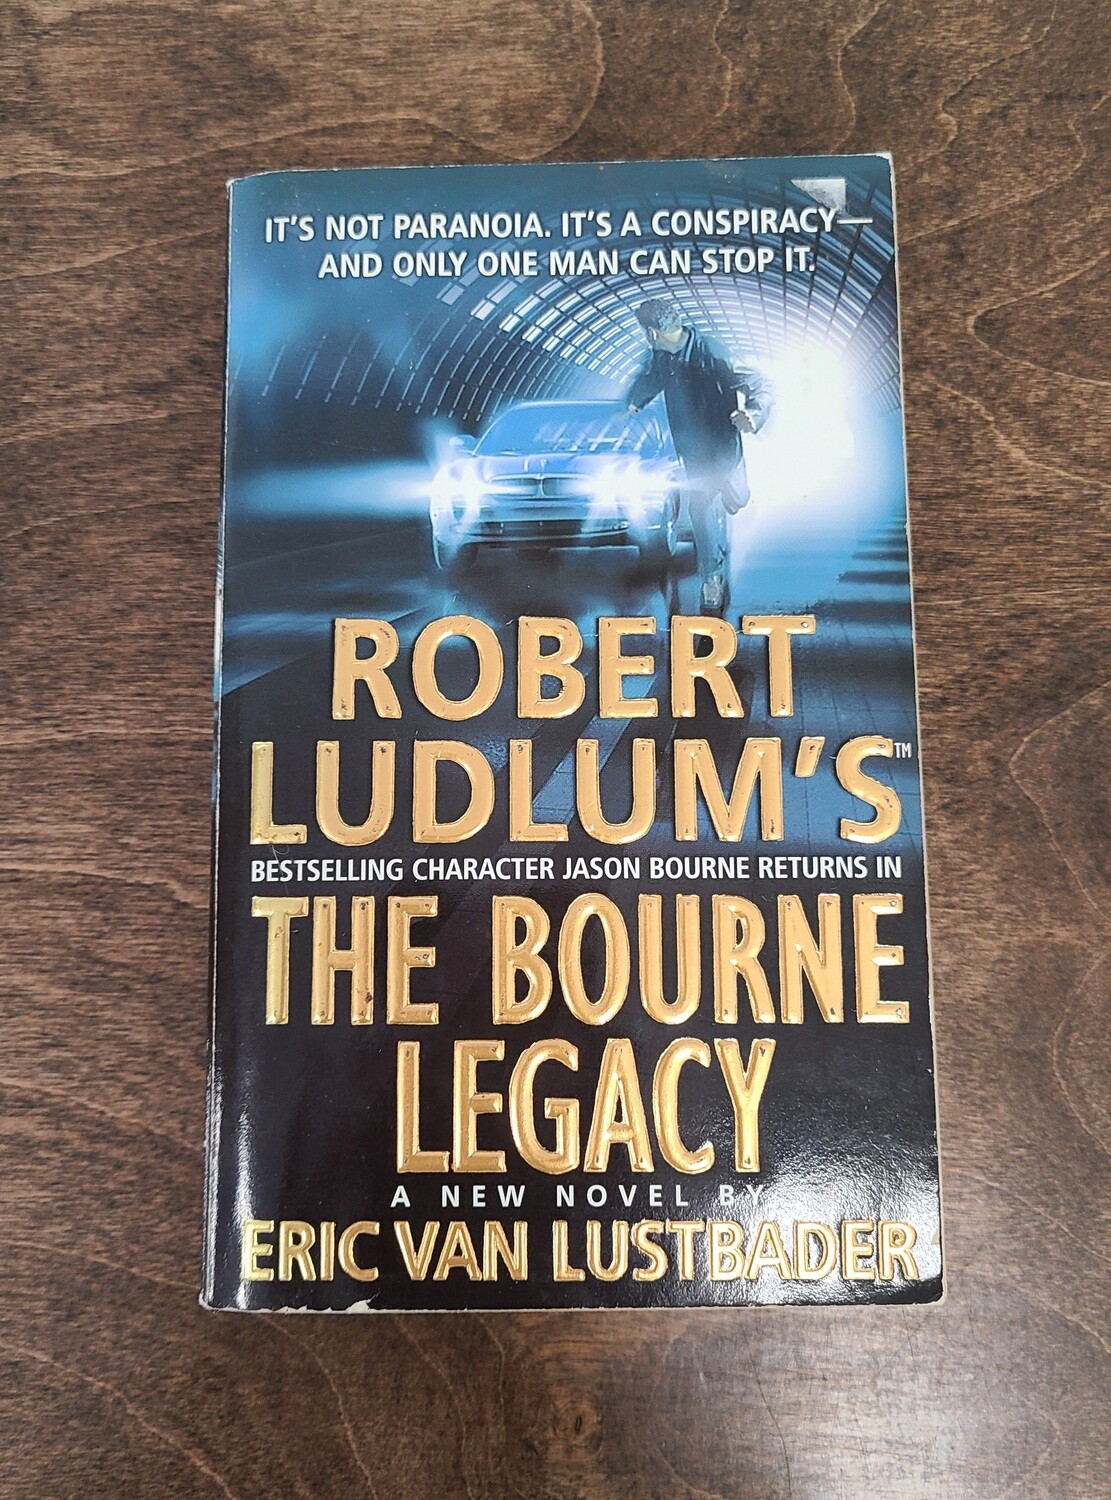 Robert Ludlum's The Bourne Legacy by Eric Van Lustbader